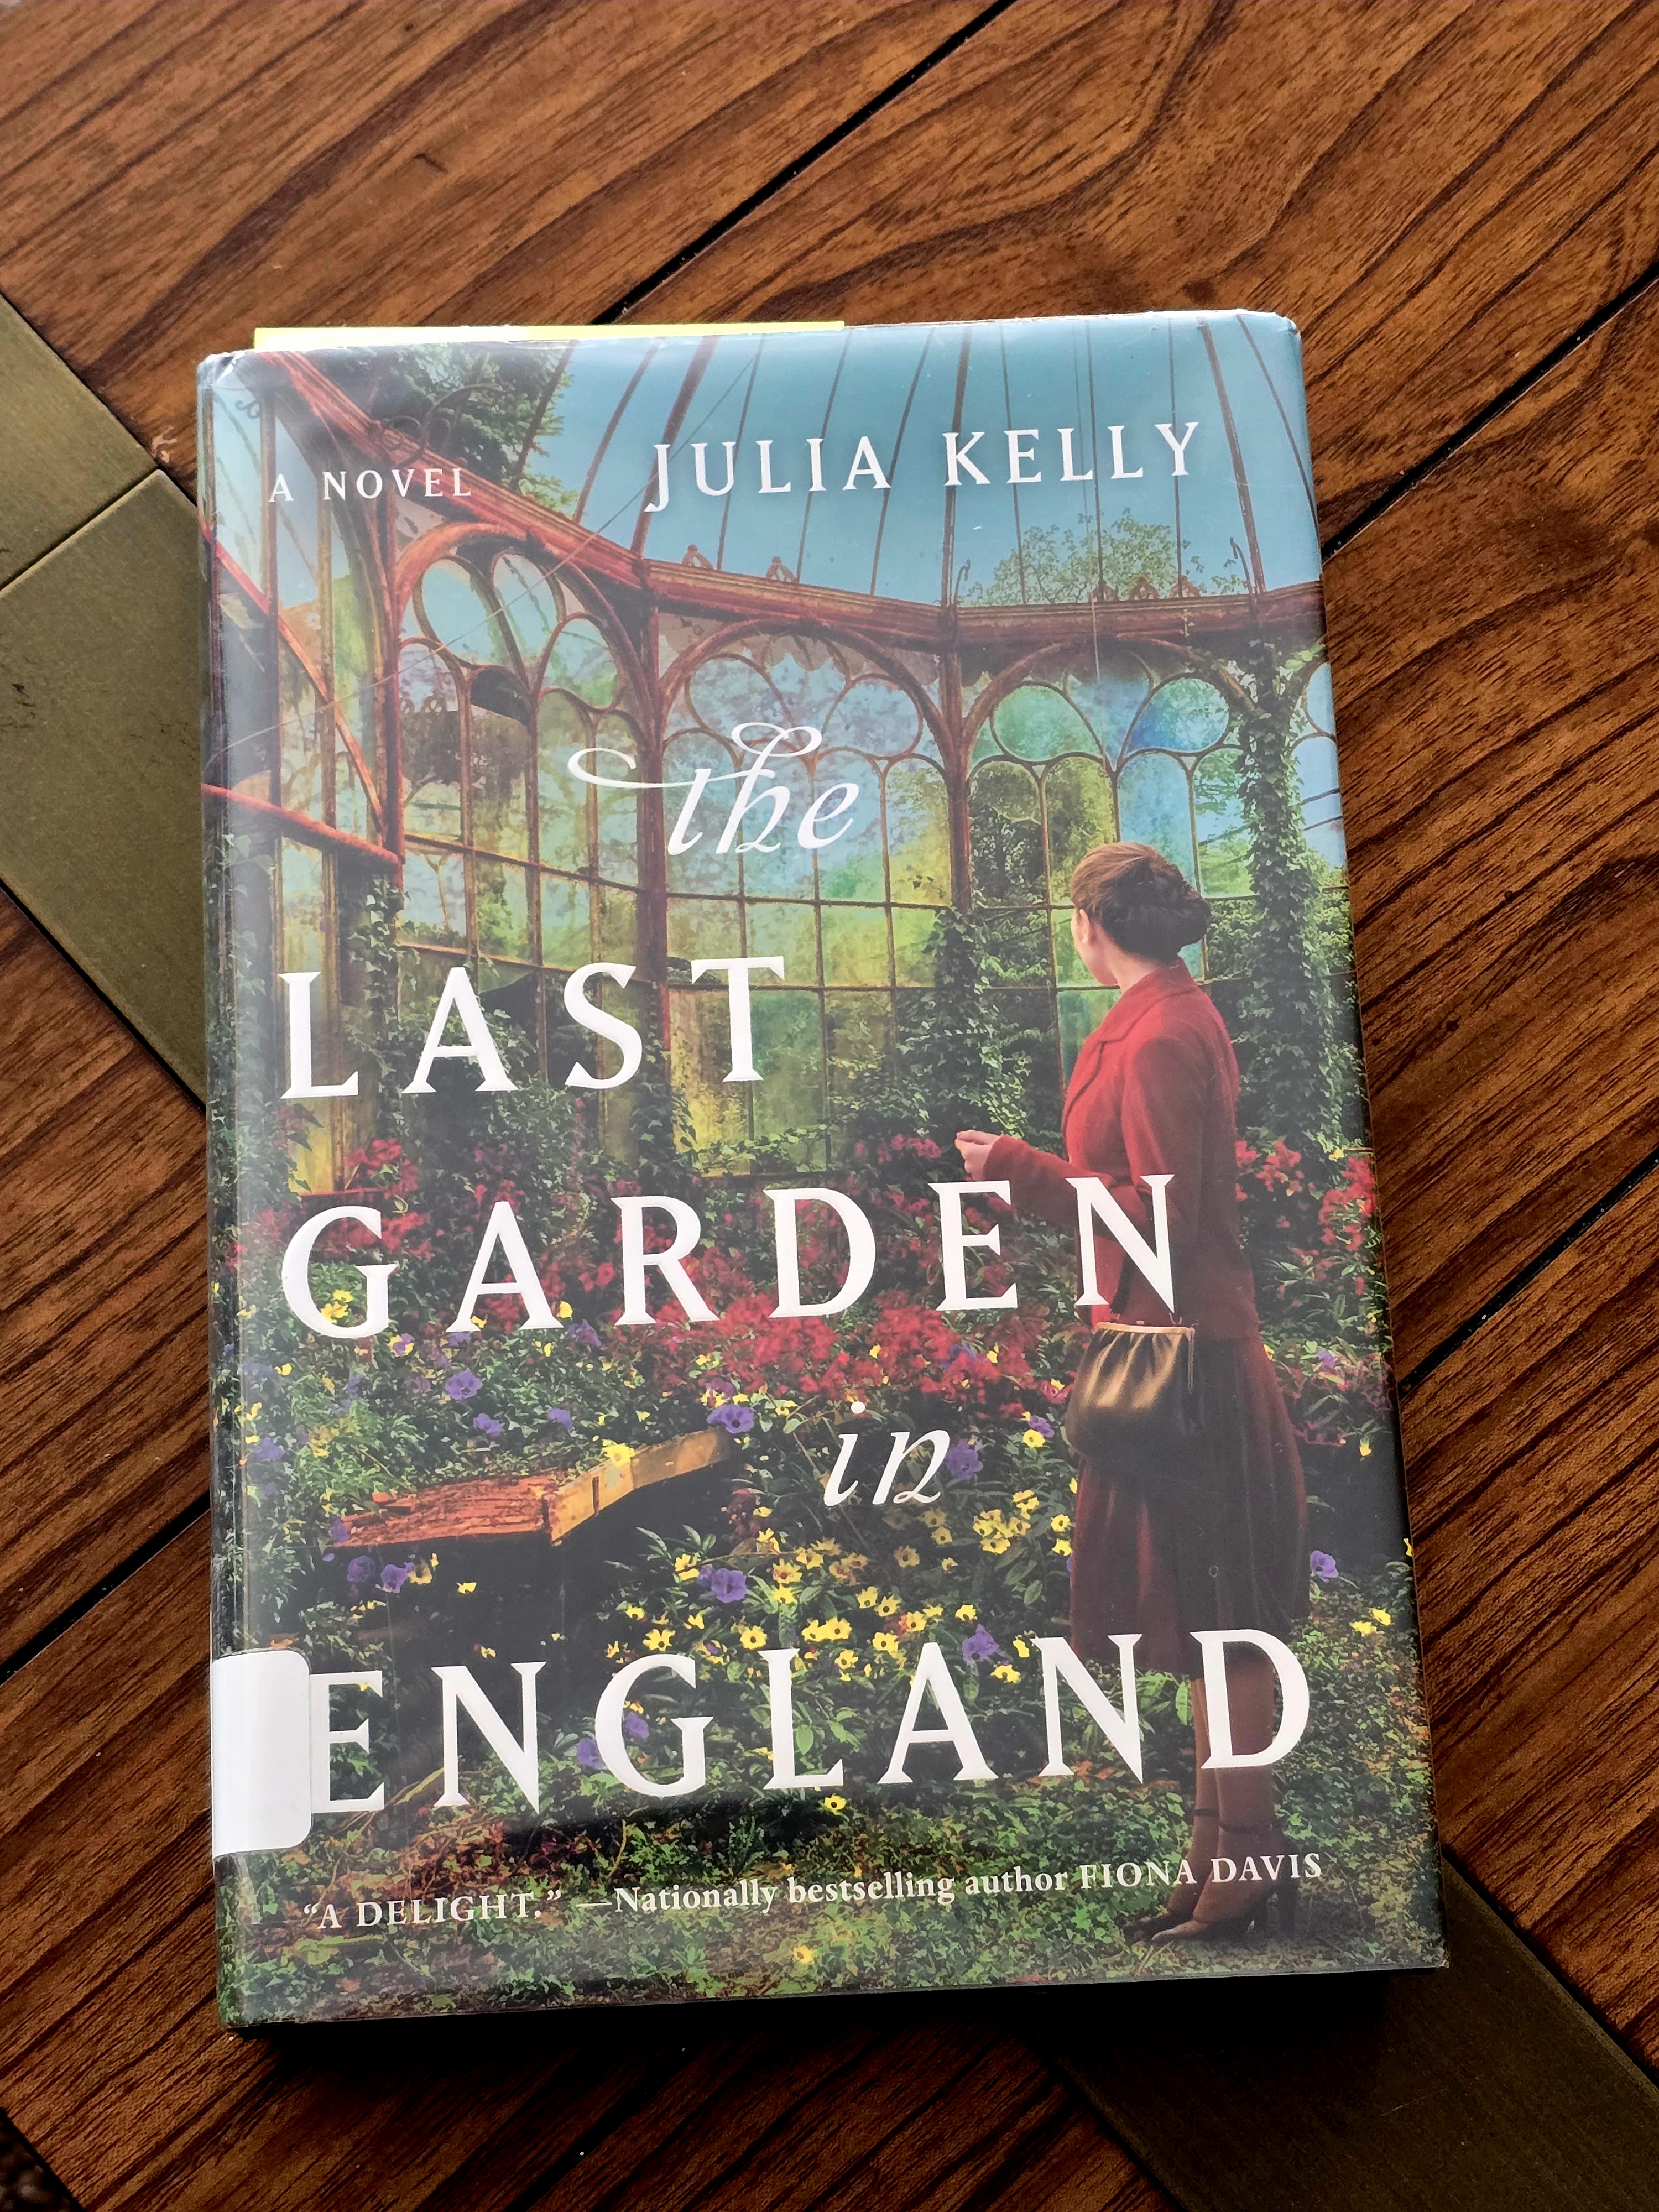 A book resting on a table with a women in a green house on the cover with white words reading The Last Garden.